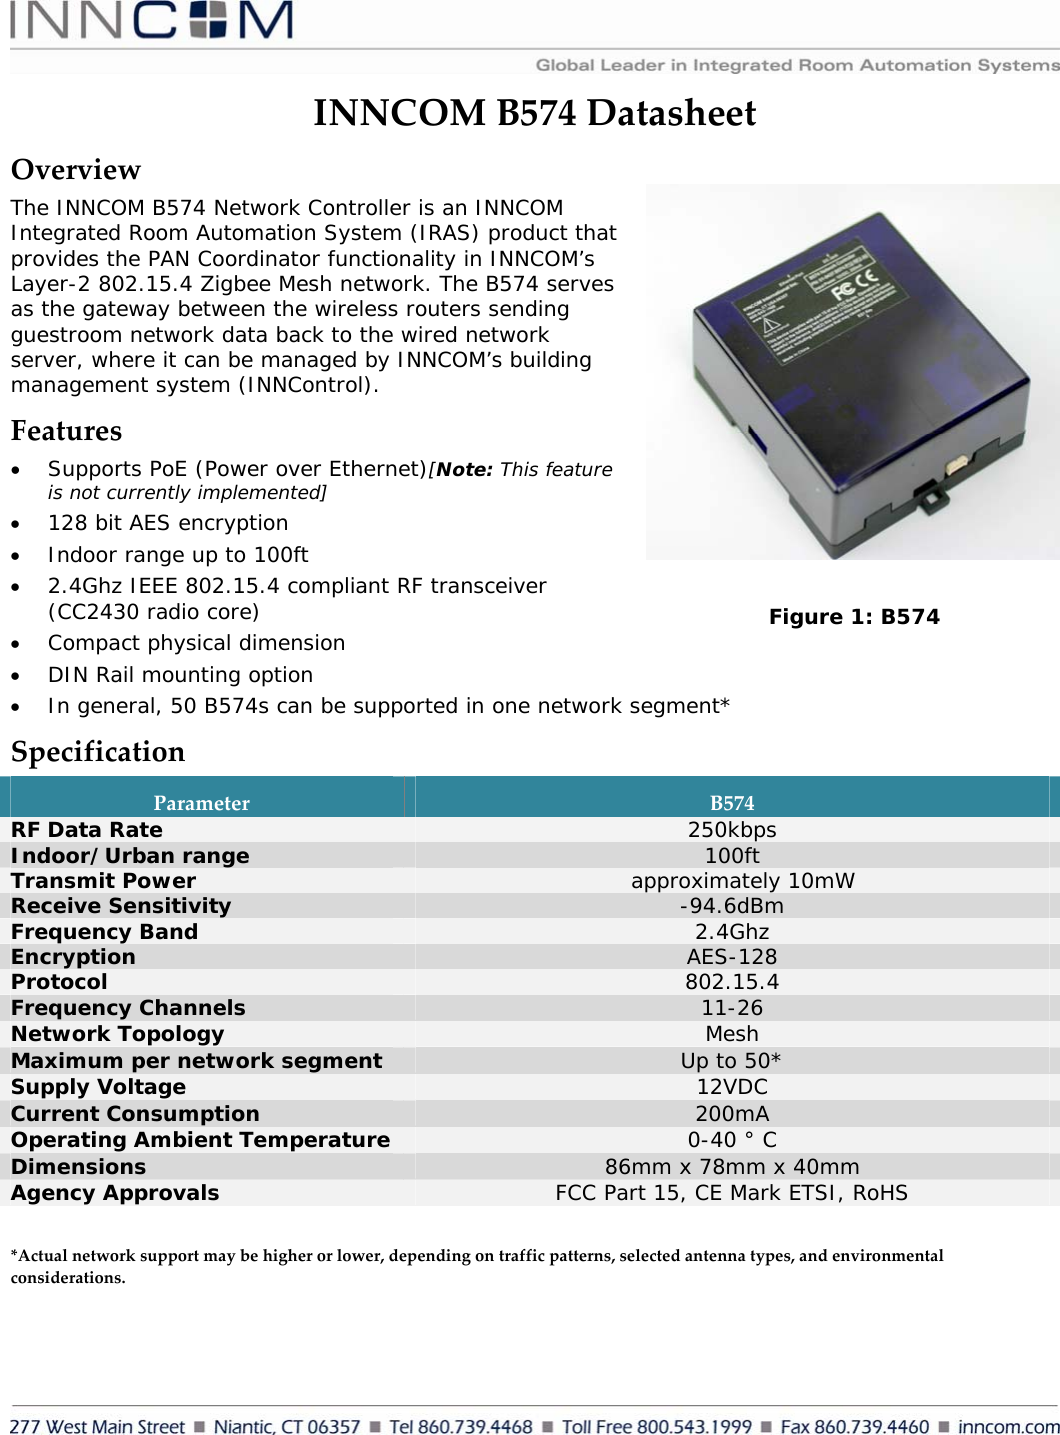     INNCOMB574DatasheetOverviewThe INNCOM B574 Network Controller is an INNCOM Integrated Room Automation System (IRAS) product that provides the PAN Coordinator functionality in INNCOM’s Layer-2 802.15.4 Zigbee Mesh network. The B574 serves as the gateway between the wireless routers sending guestroom network data back to the wired network server, where it can be managed by INNCOM’s building management system (INNControl).  Features• Supports PoE (Power over Ethernet)[Note: This feature is not currently implemented] • 128 bit AES encryption • Indoor range up to 100ft • 2.4Ghz IEEE 802.15.4 compliant RF transceiver (CC2430 radio core) • Compact physical dimension • DIN Rail mounting option • In general, 50 B574s can be supported in one network segment* SpecificationParameterB574RF Data Rate  250kbps Indoor/Urban range  100ft Transmit Power                                                                                                      approximately 10mW Receive Sensitivity  -94.6dBm Frequency Band  2.4Ghz Encryption  AES-128 Protocol  802.15.4 Frequency Channels  11-26 Network Topology  Mesh Maximum per network segment  Up to 50* Supply Voltage  12VDC Current Consumption  200mA Operating Ambient Temperature  0-40 ° C Dimensions  86mm x 78mm x 40mm Agency Approvals  FCC Part 15, CE Mark ETSI, RoHS  *Actualnetworksupportmaybehigherorlower,dependingontrafficpatterns,selectedantennatypes,andenvironmentalconsiderations.Figure 1: B574